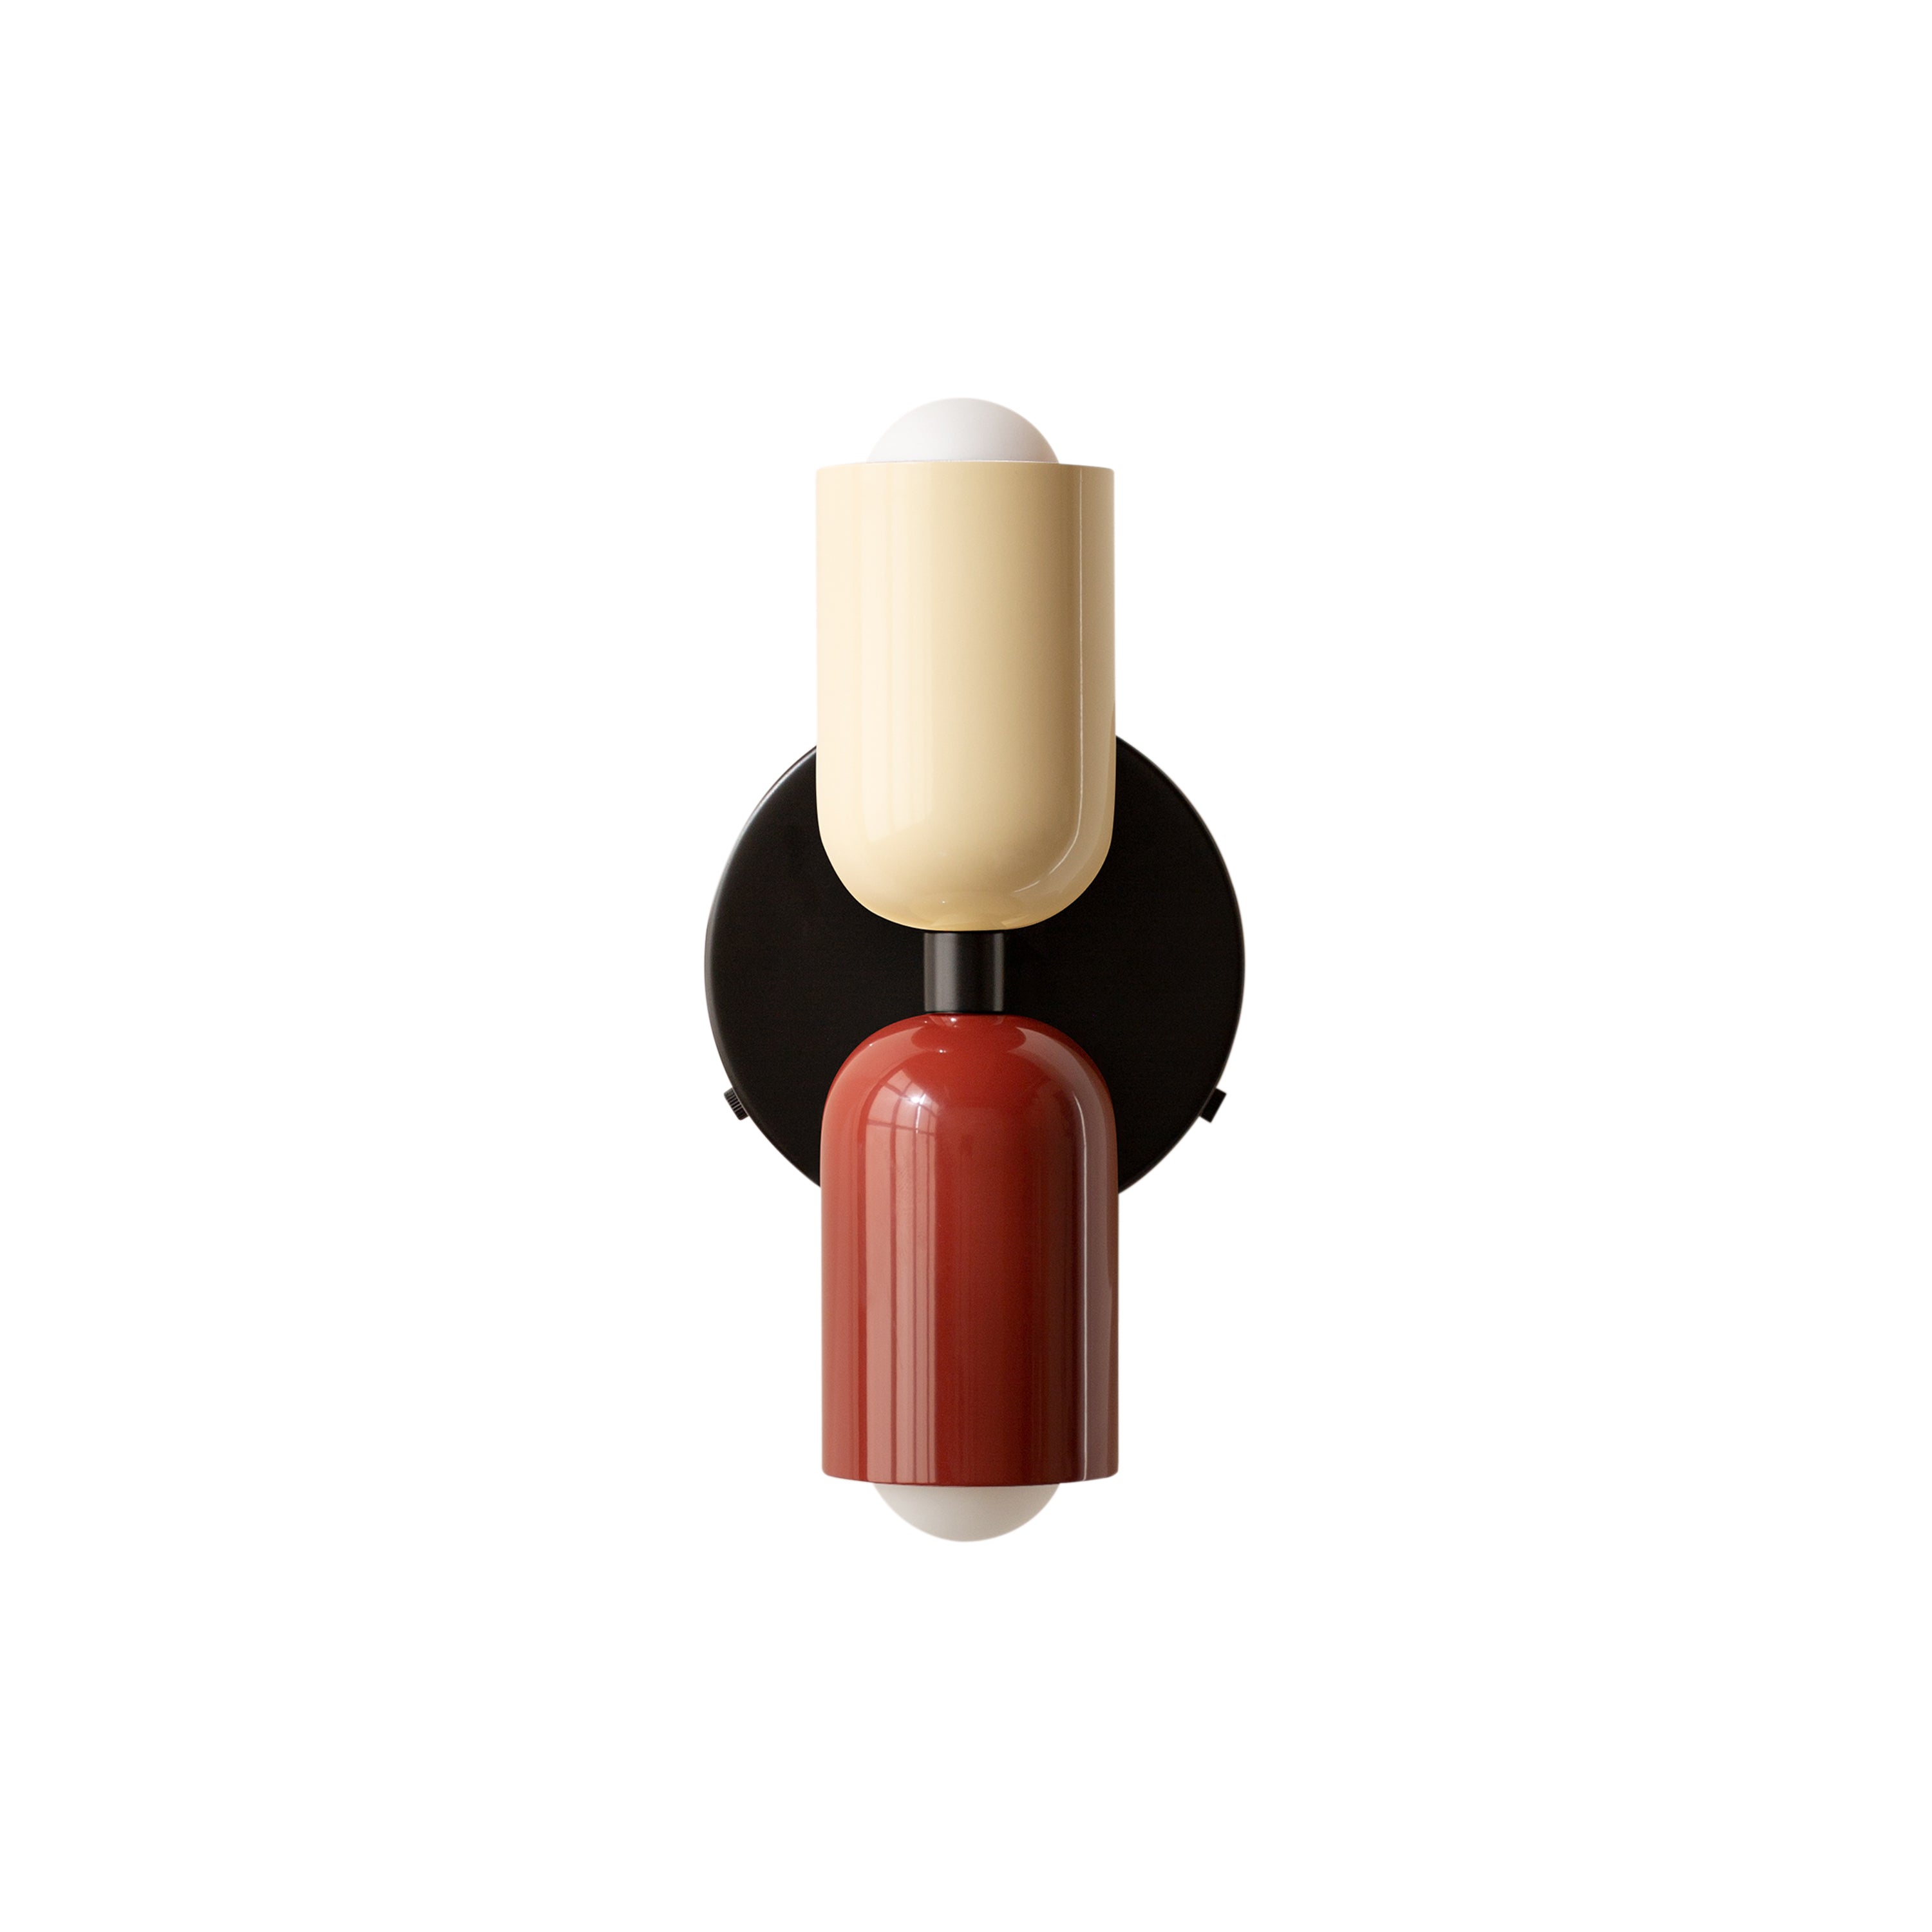 Up Down Sconce: Duo-Tone + Bone + Oxide Red + Hardwire